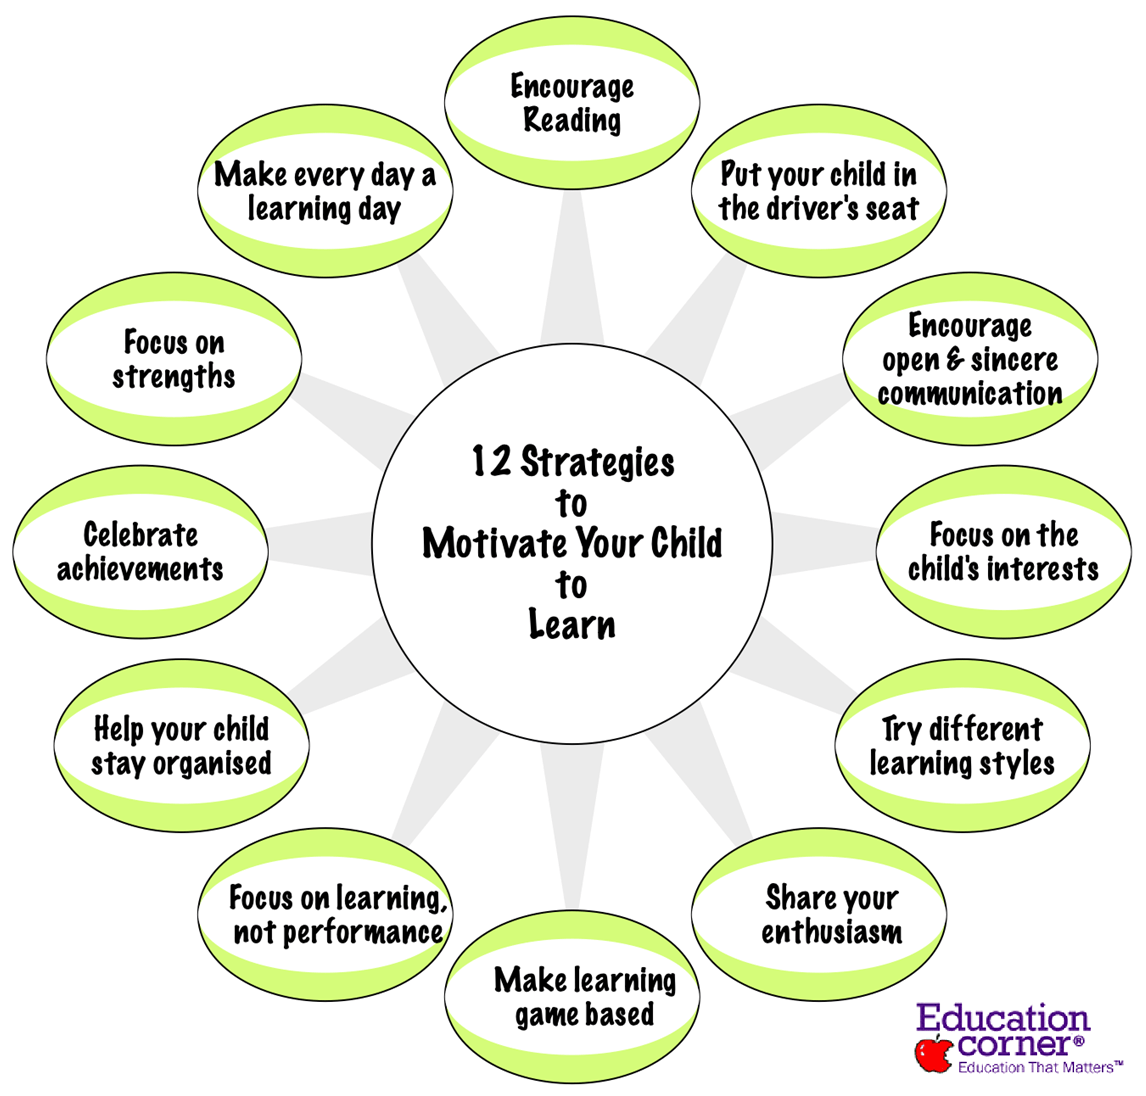 12 Strategies to Motivate Your Child to Learn